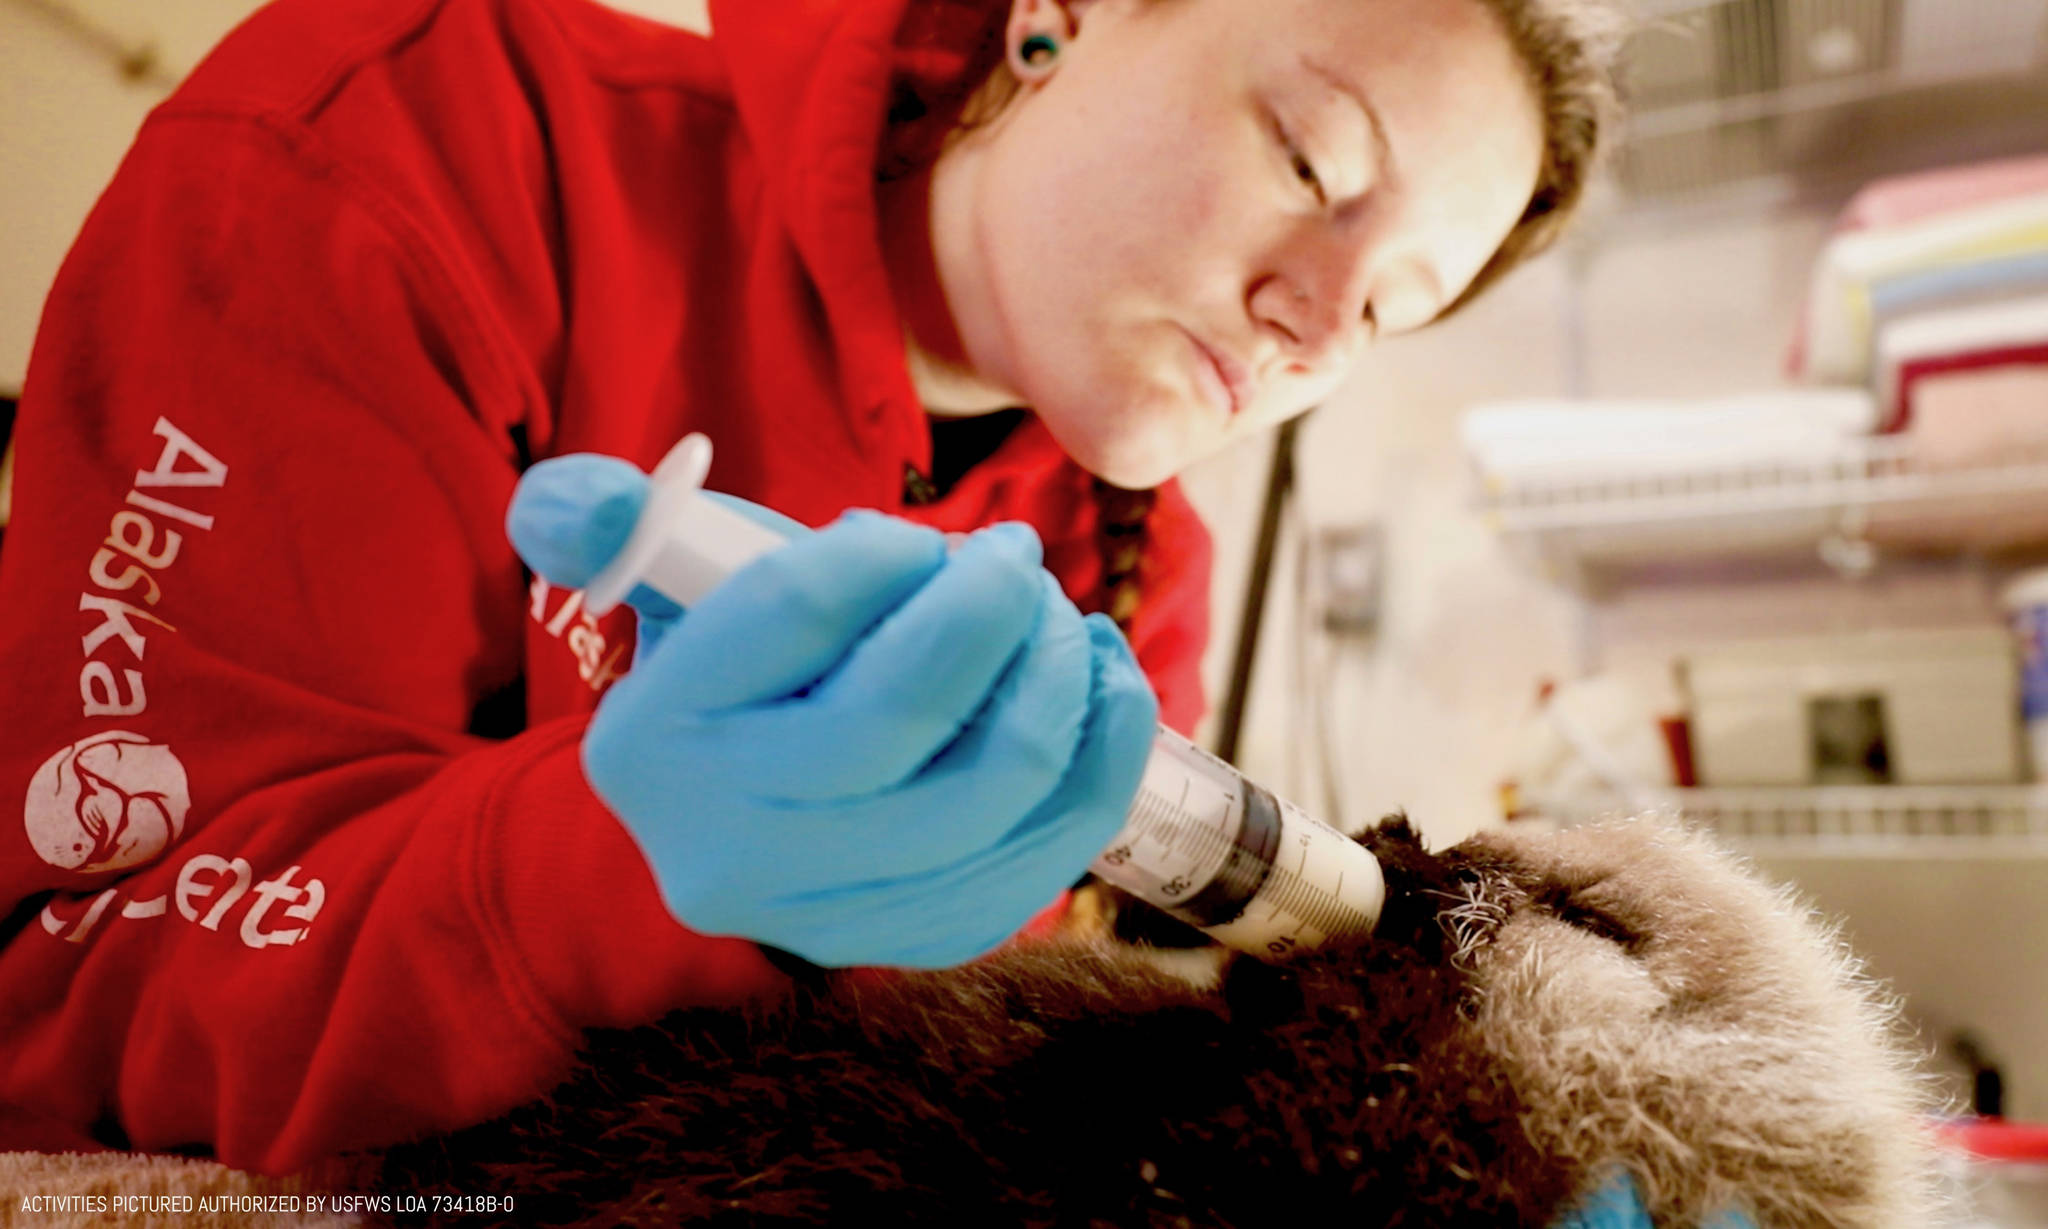 An Alaska SeaLife Center animal care specialist feeds a rescued sea otter pup. The female pup was admitted April 9, after the newborn was floating alone in Kachemak Bay. (Photo courtesy Alaska SeaLife Center)